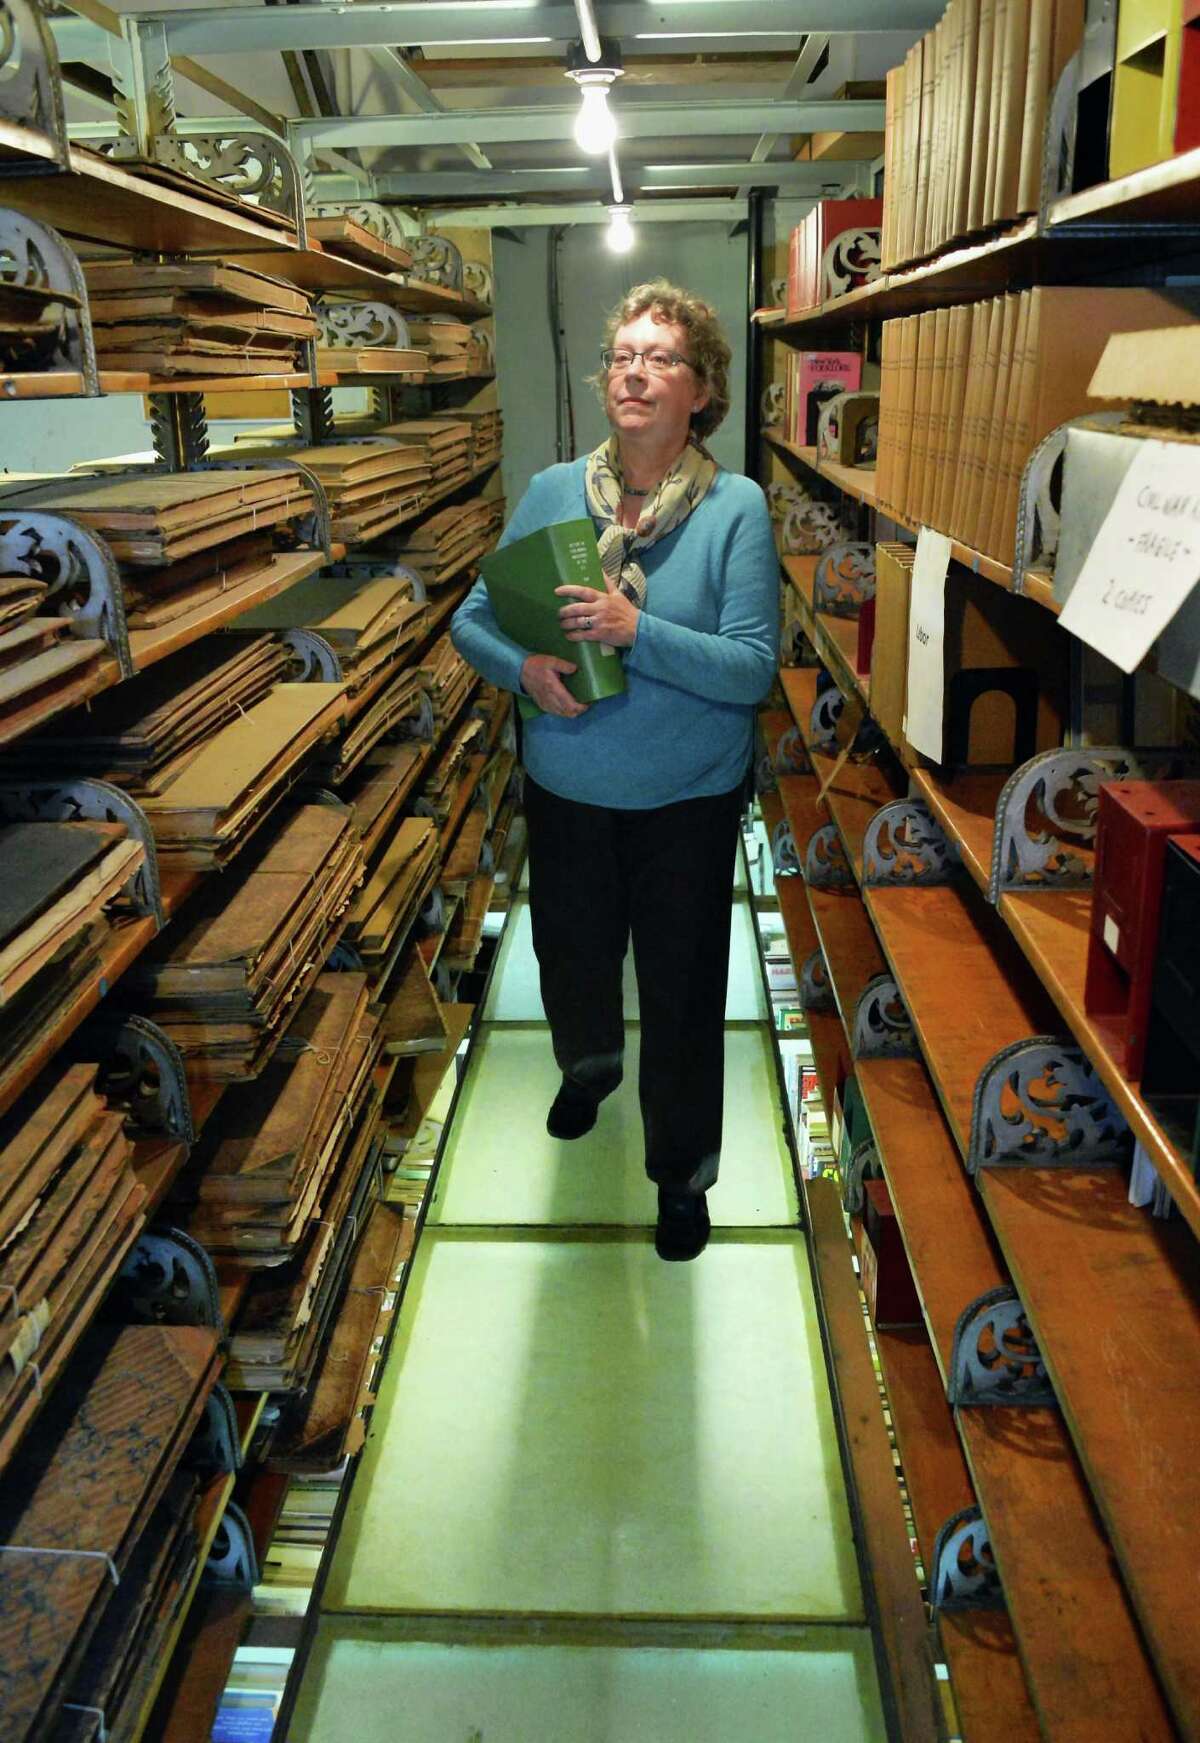 President of the Friends of the Troy Public Library Mary Muller in the library's third floor stacks Friday Nov. 13, 2015 in Troy, NY. (John Carl D'Annibale / Times Union)